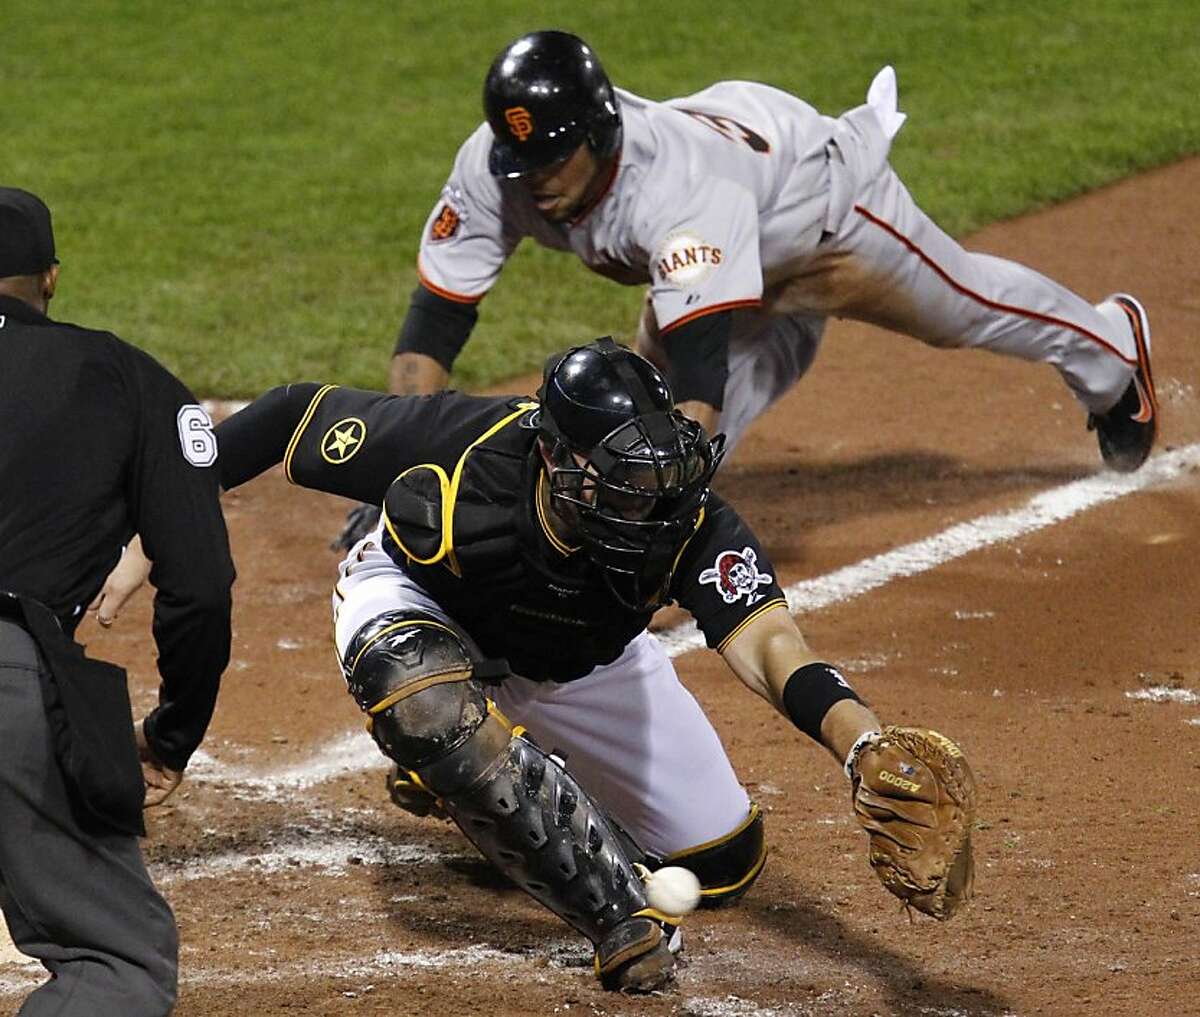 Pittsburgh Pirates catcher Chris Snyder, bottom, can't handle the throw from first baseman Lyle Overbay as San Francisco Giants' Darren Ford, top, scores from third on a ground out by Freddy Sanchez during the 10th inning of a baseball game in Pittsburghon Tuesday, April 26, 2011. The Giants won 3-2 in 10 innings.